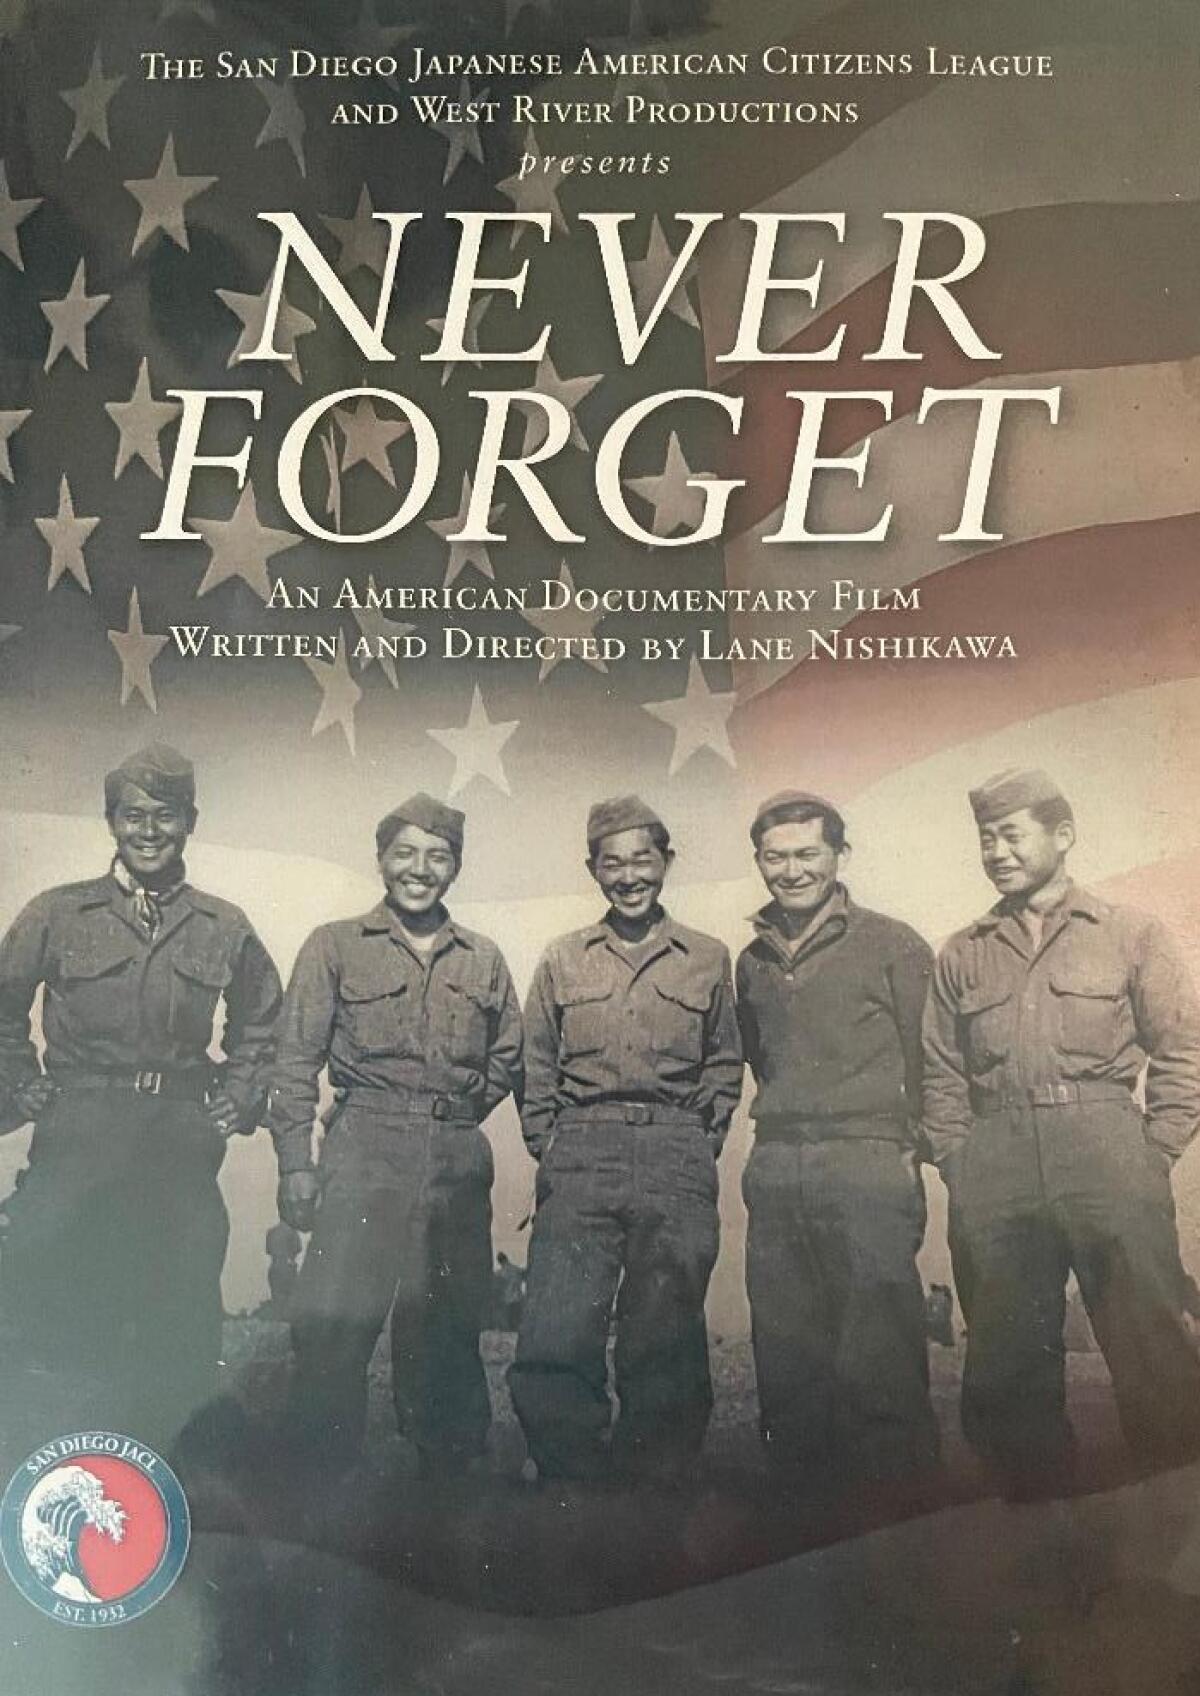 A cover image shows five Japanese American soldiers in U.S. uniforms in World War II.